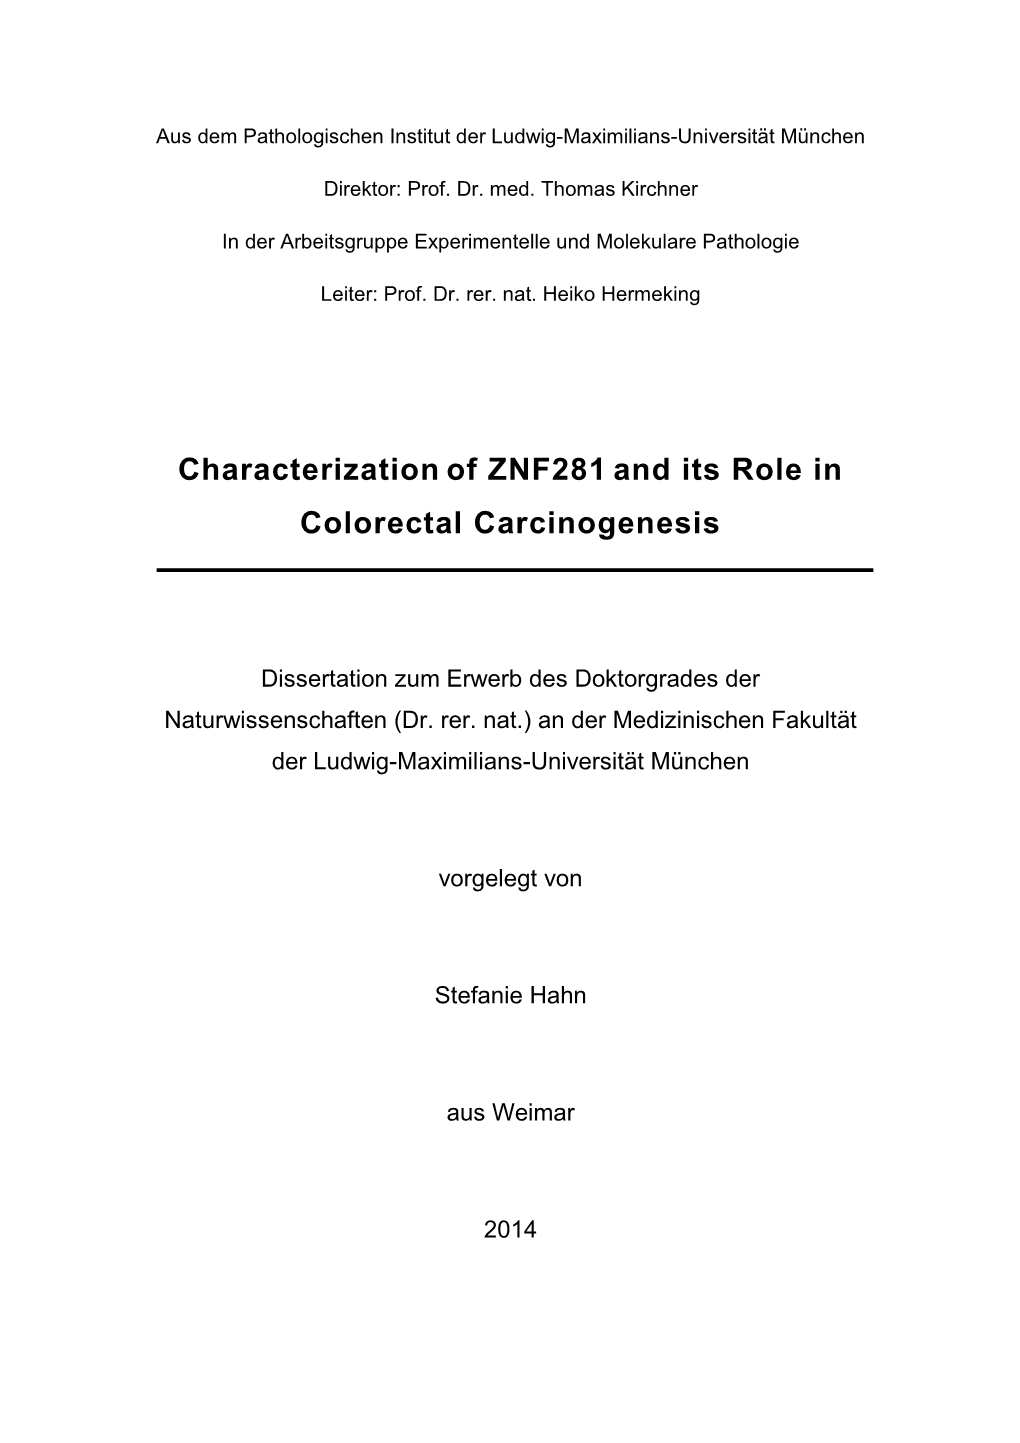 Characterization of ZNF281 and Ist Role in Colorectal Carcinogenesis